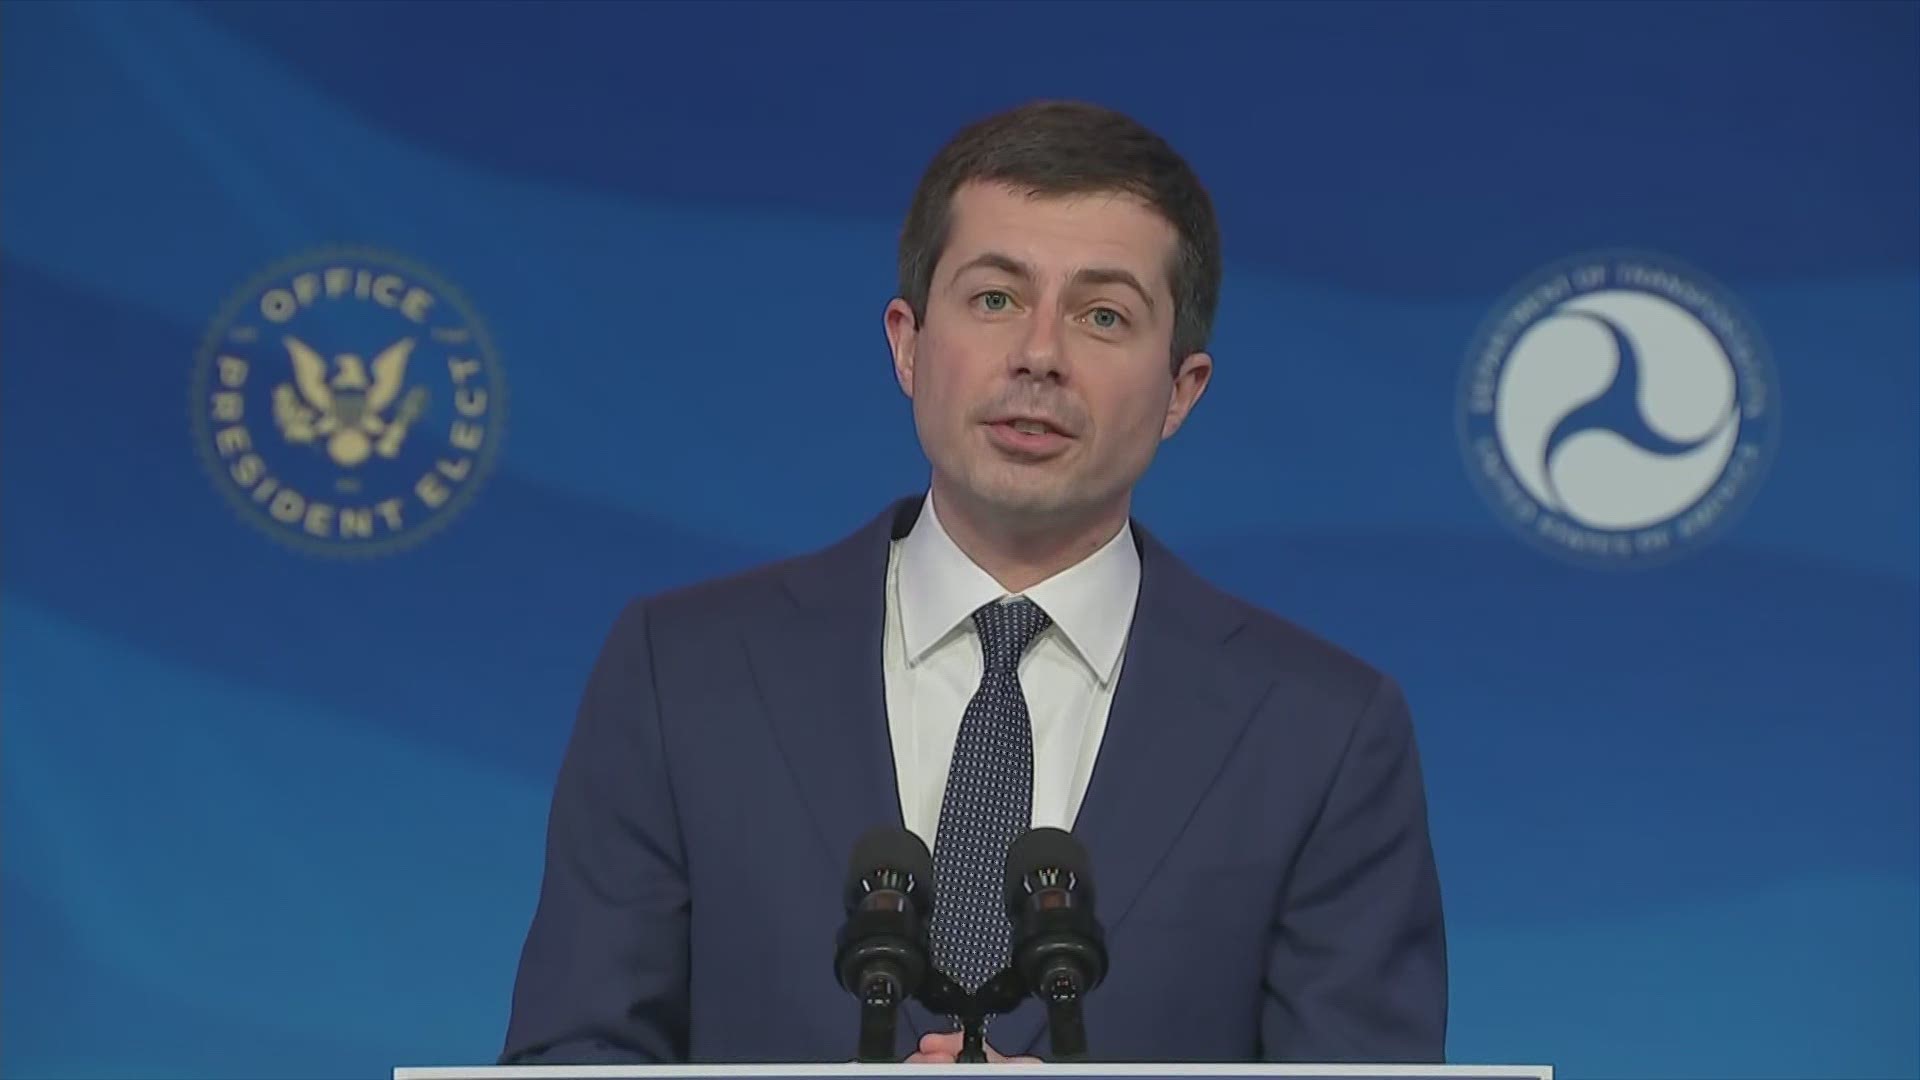 Pete Buttigieg, Biden's pick for transportation secretary, acknowledged he's probably the 2nd biggest train enthusiast in the incoming administration, behind Biden.